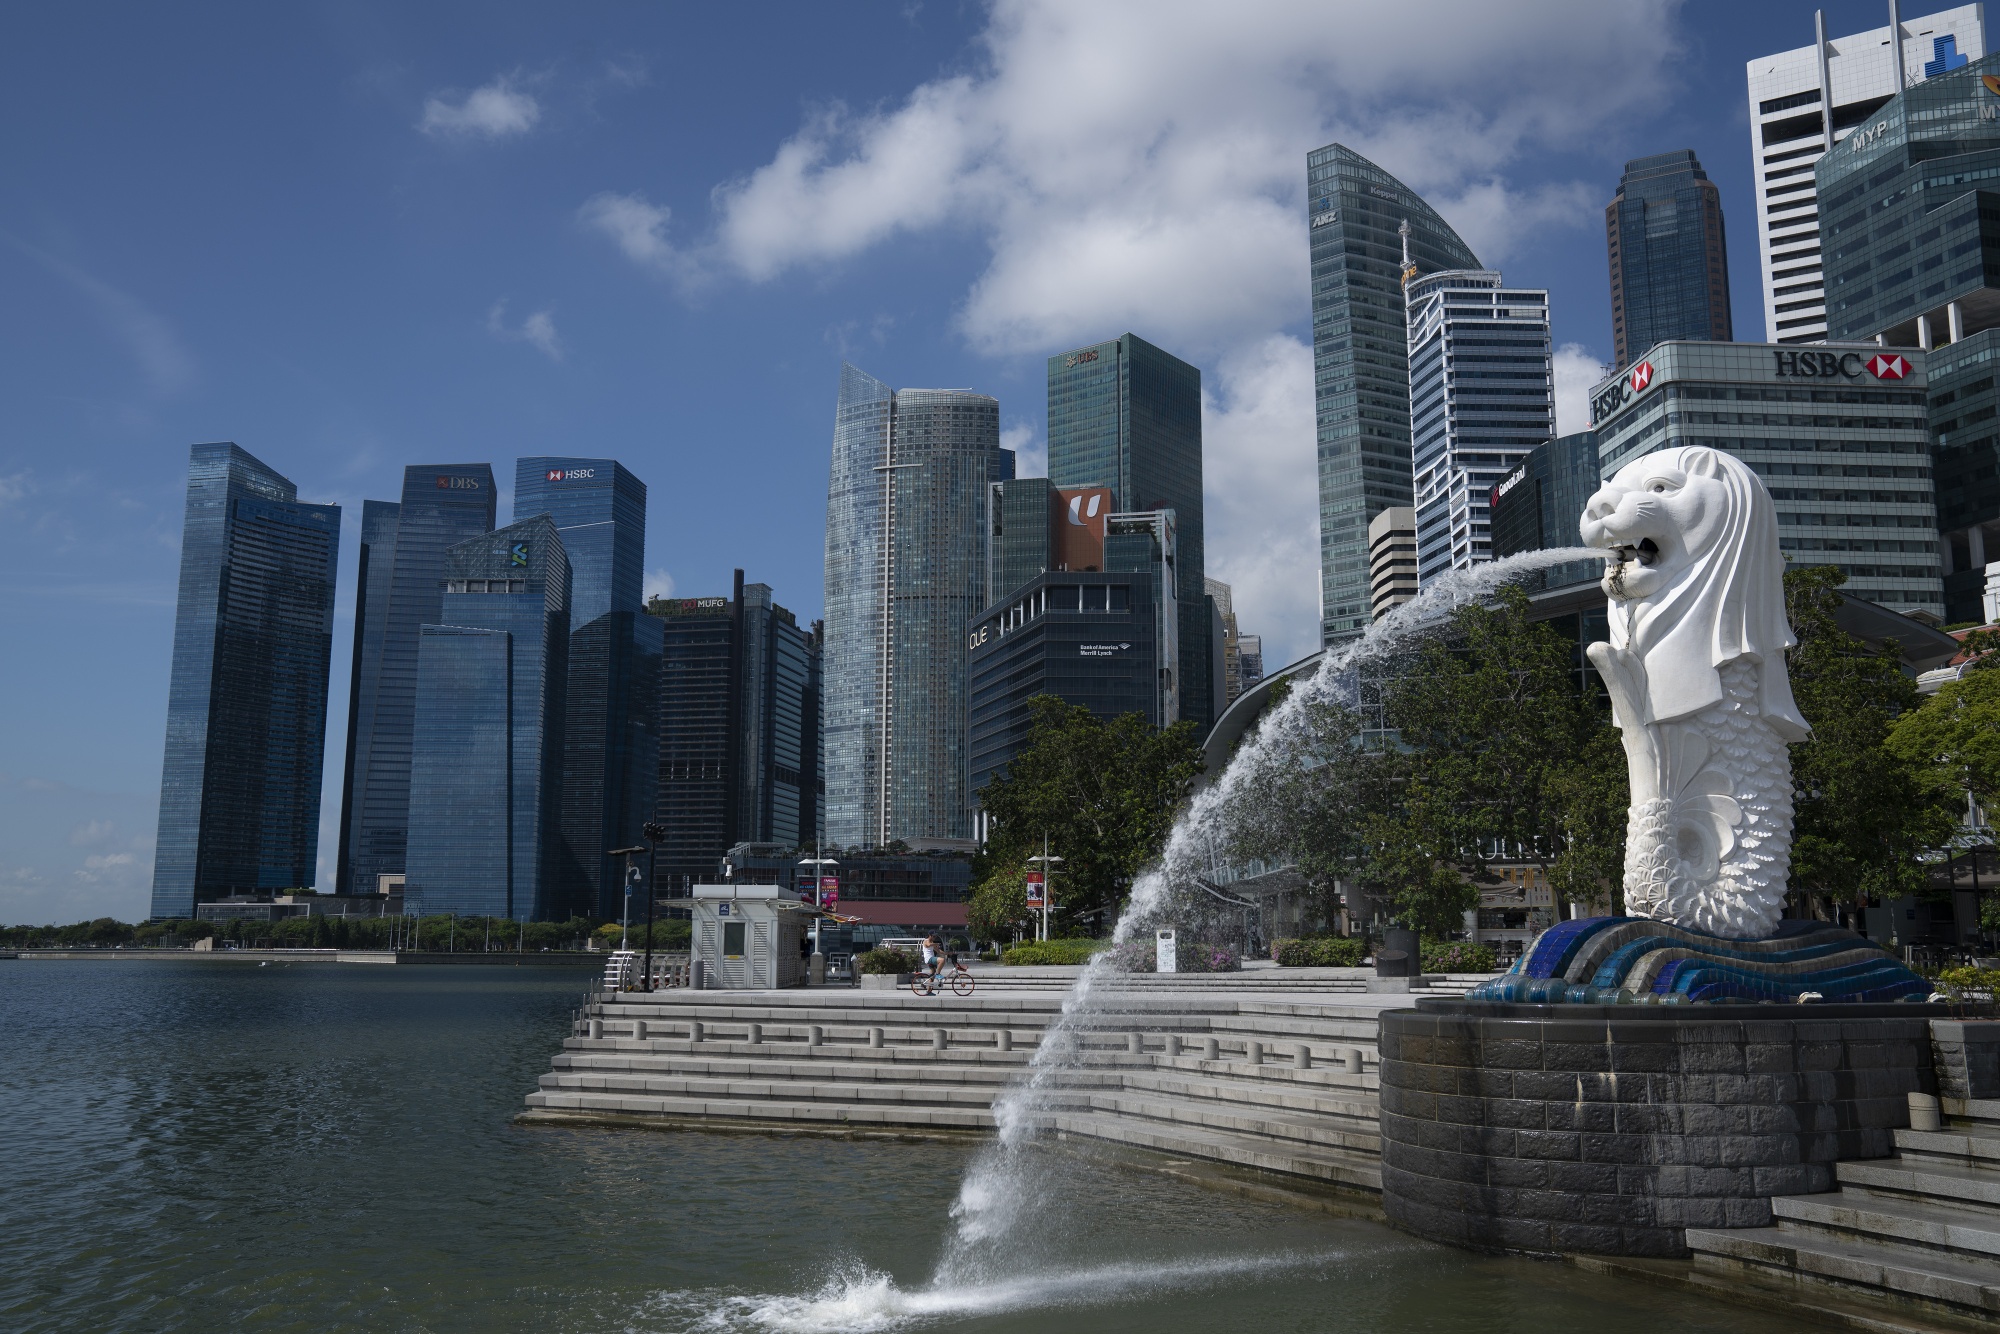 The Merlion Park waterfront in Singapore.